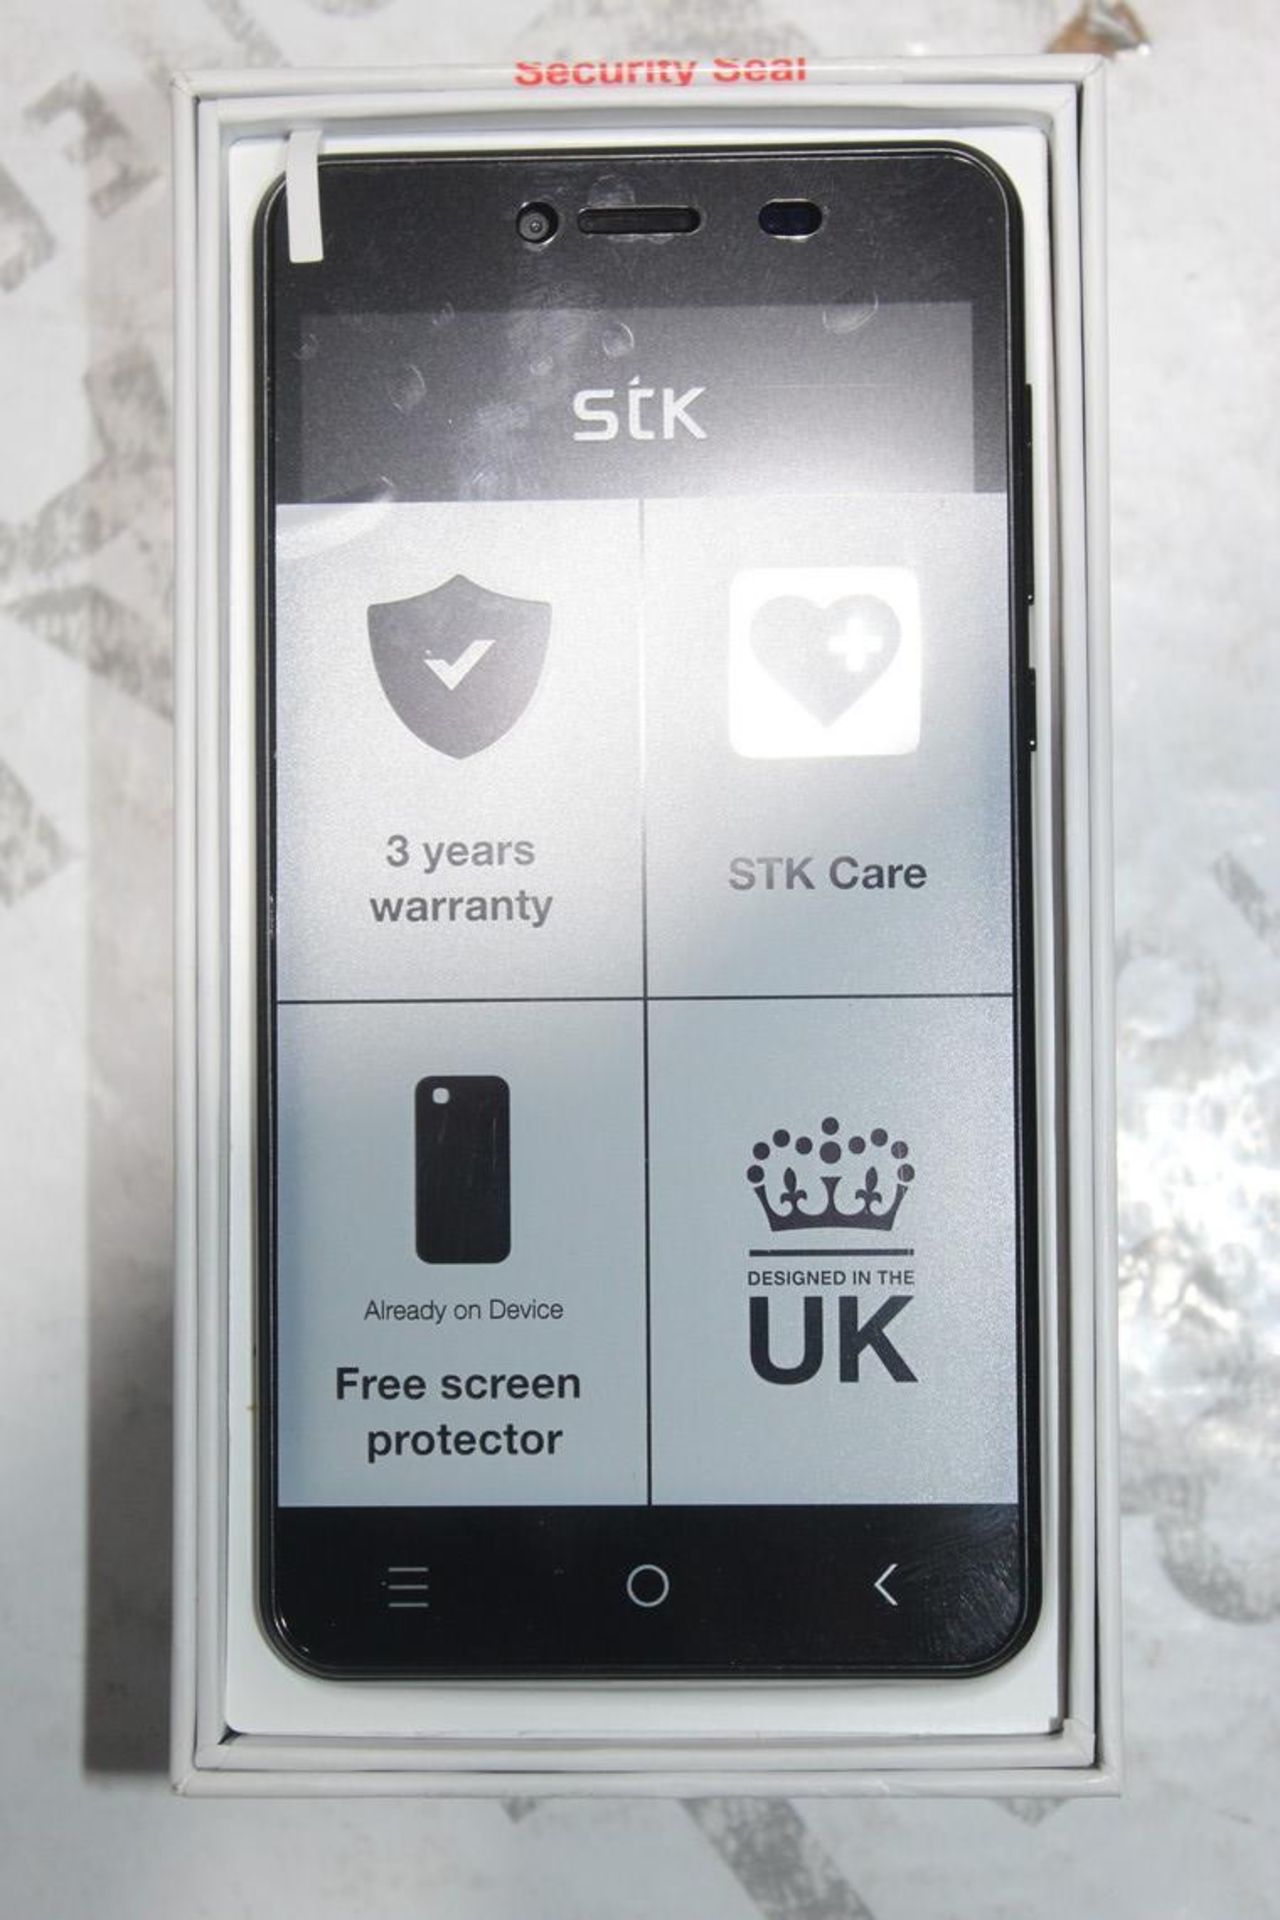 Boxed STk Android 6.0 Marshmallow Software 4GB Smart Phone RRP £120